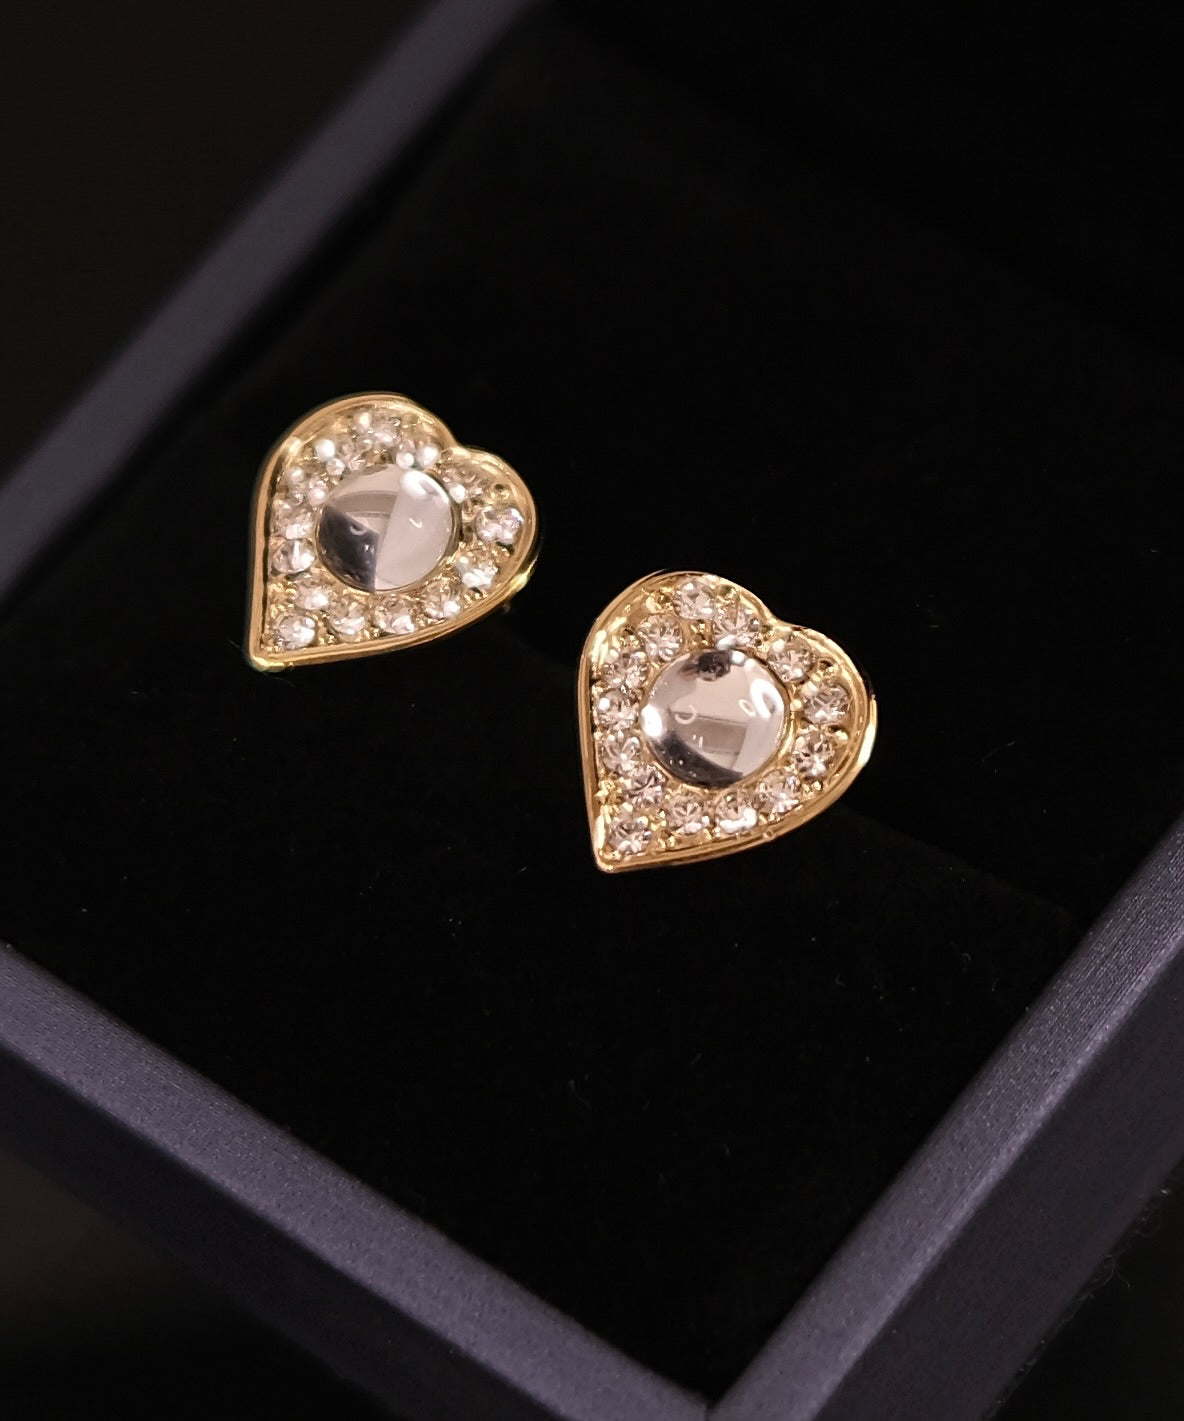 New Heart Silver Stud Earrings Cabochon Sterling Silver 925 Rhodium Plated Gorgeous Swarovski Crystal